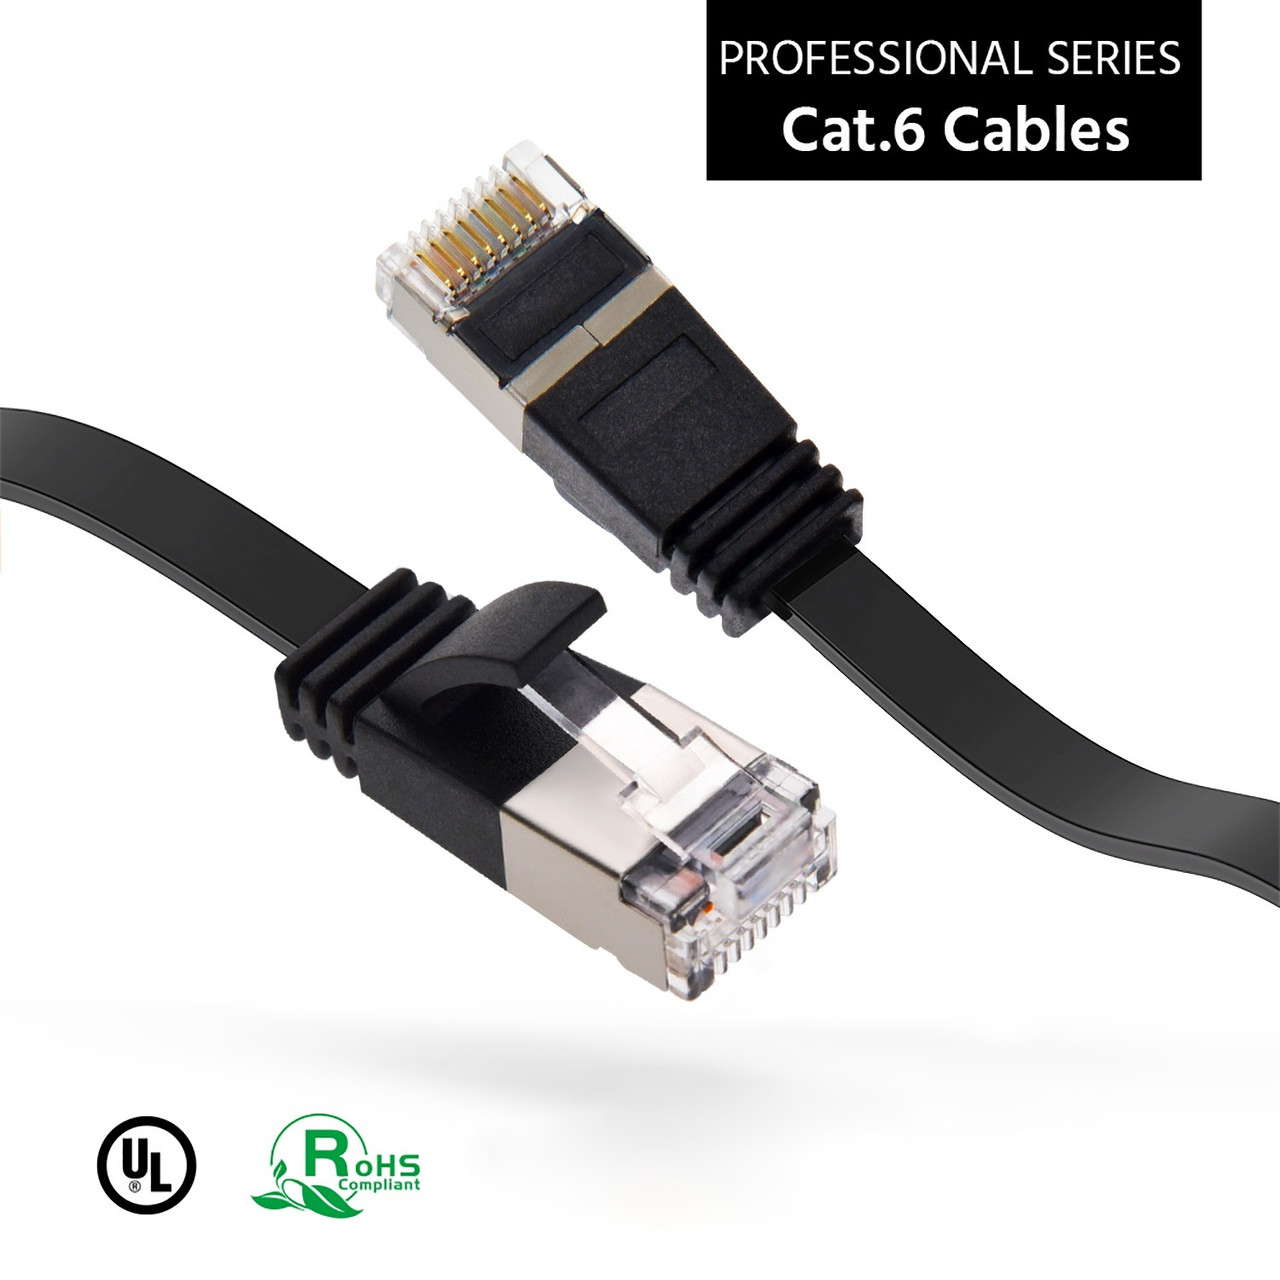 Cat 6 Flat Shielded Booted Gigabit Network Cables